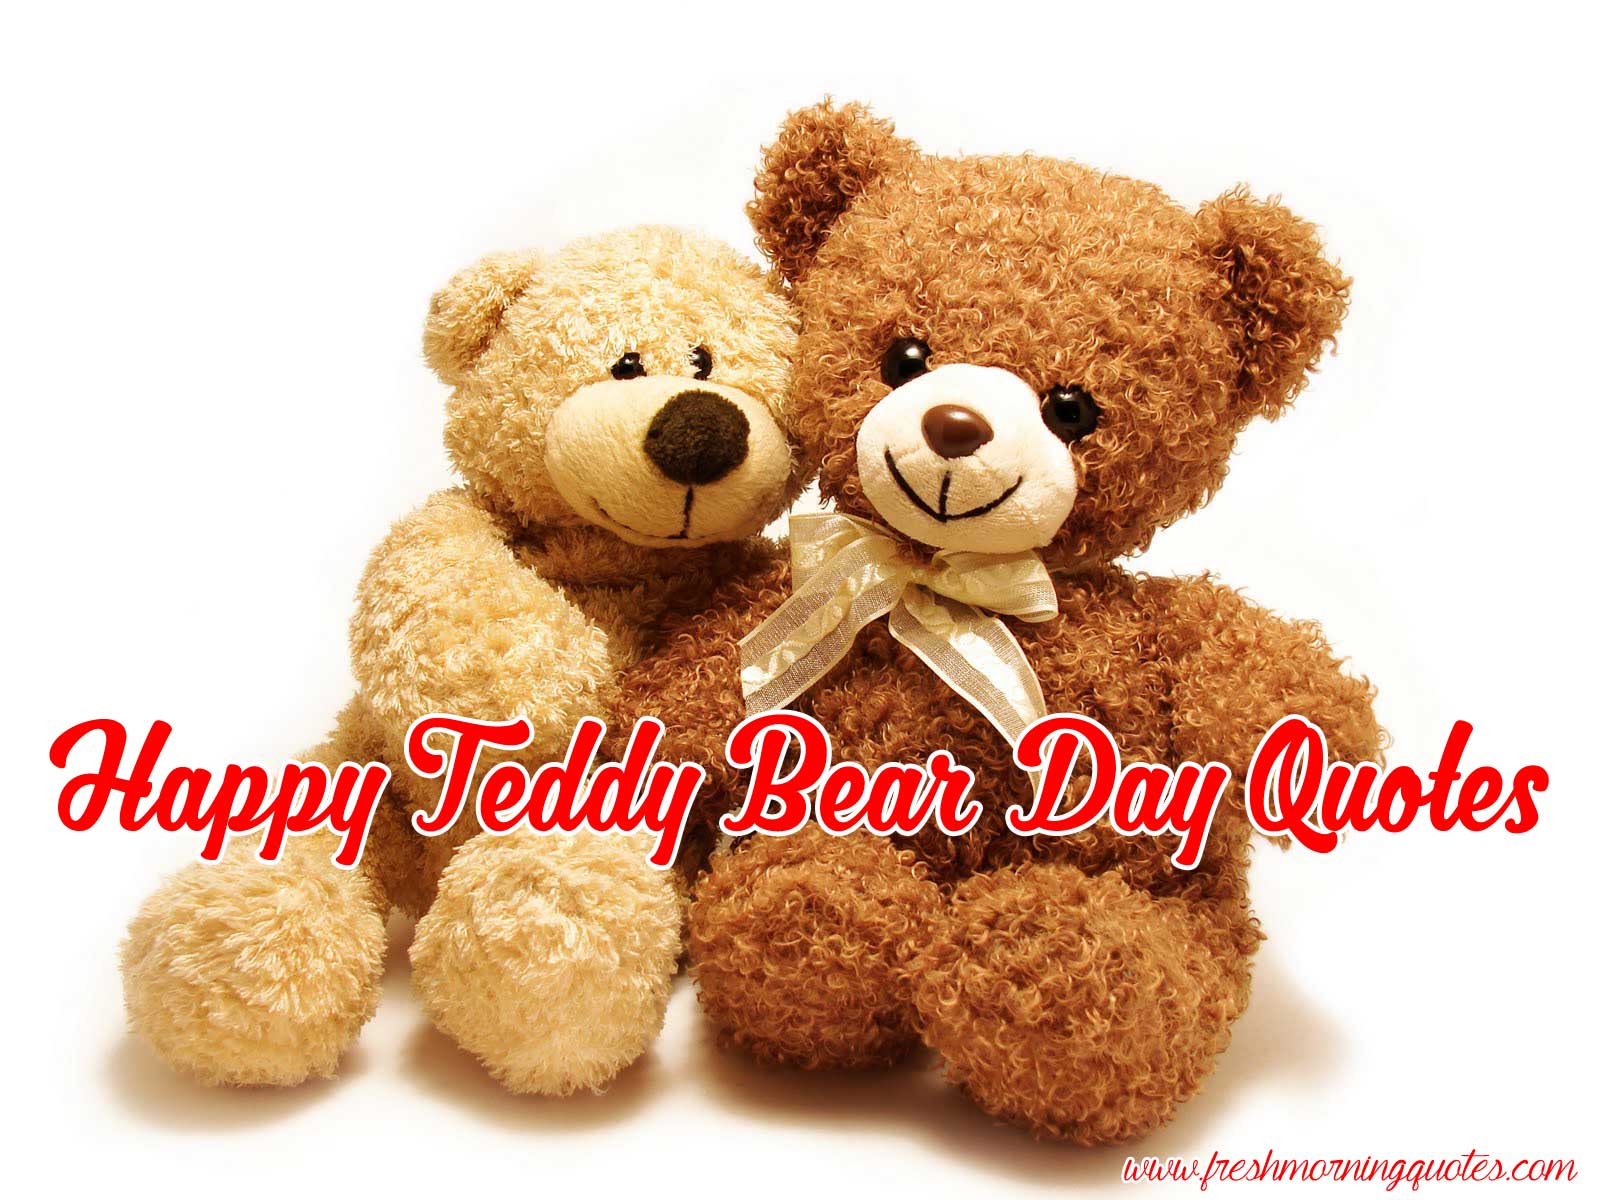 Teddy Bear Day 2019 Quotes Sayings and Images